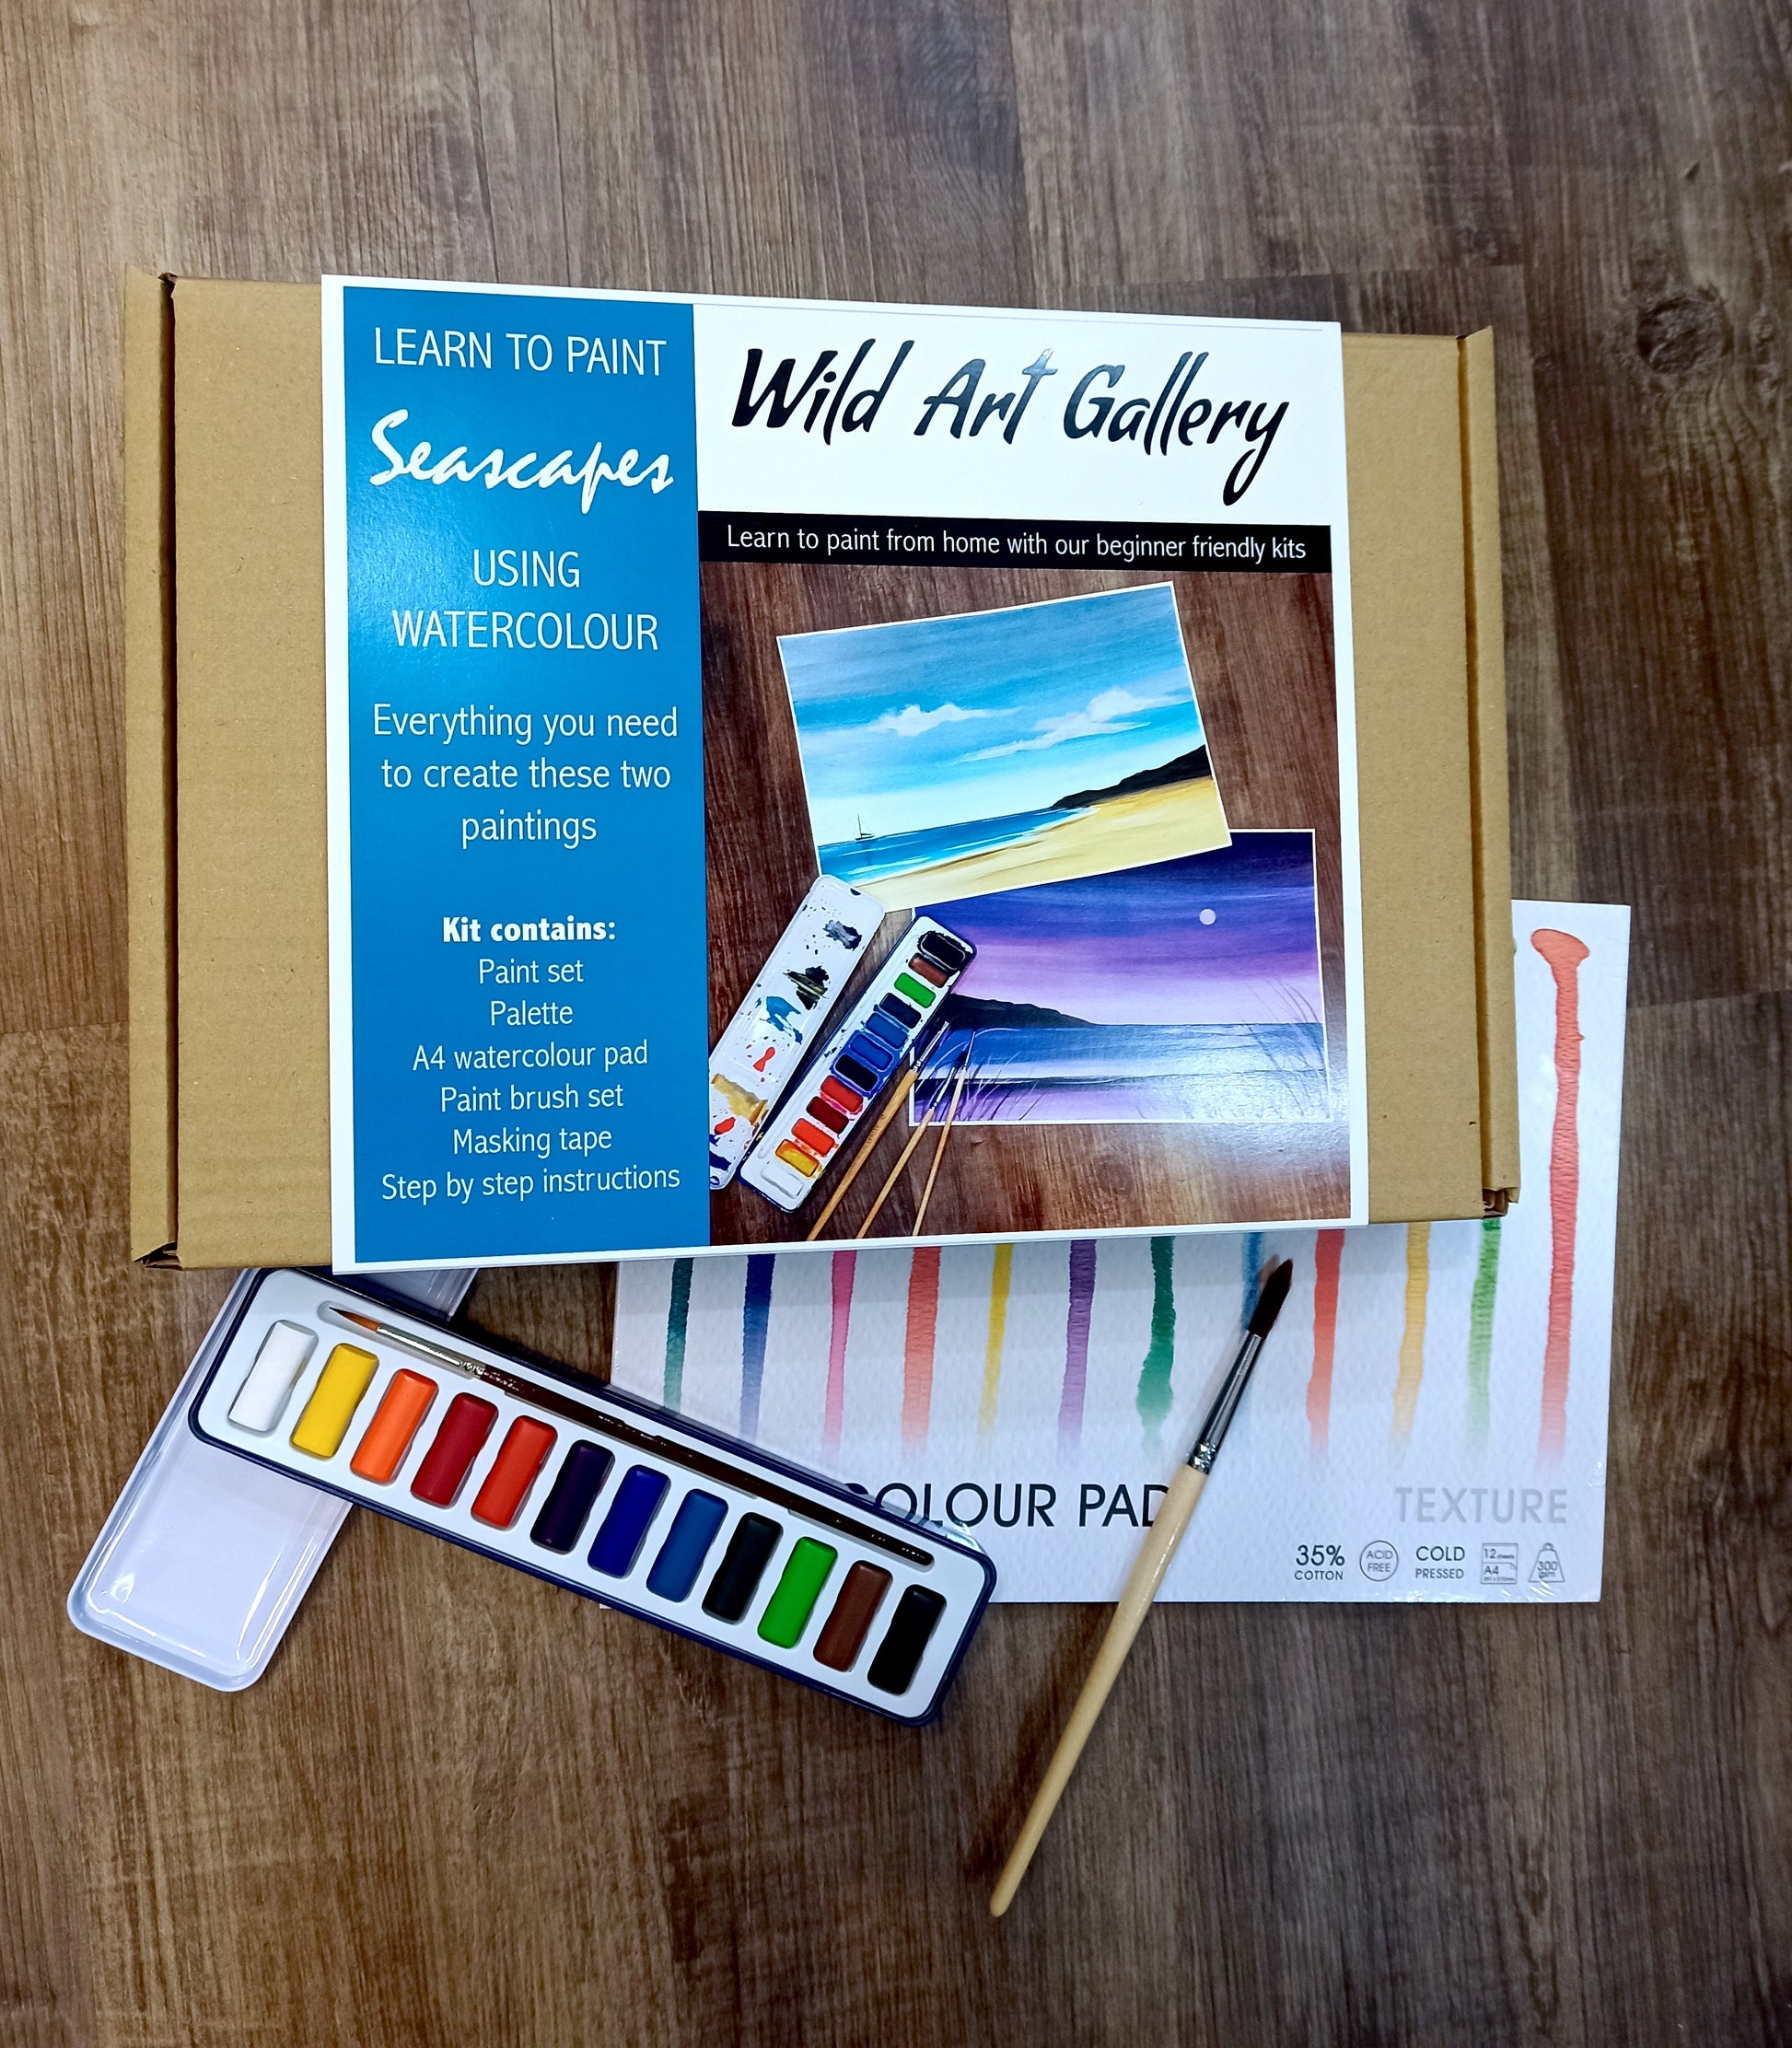 Learn to paint seascapes.  Everything you need to paint two seascapes using watercolours